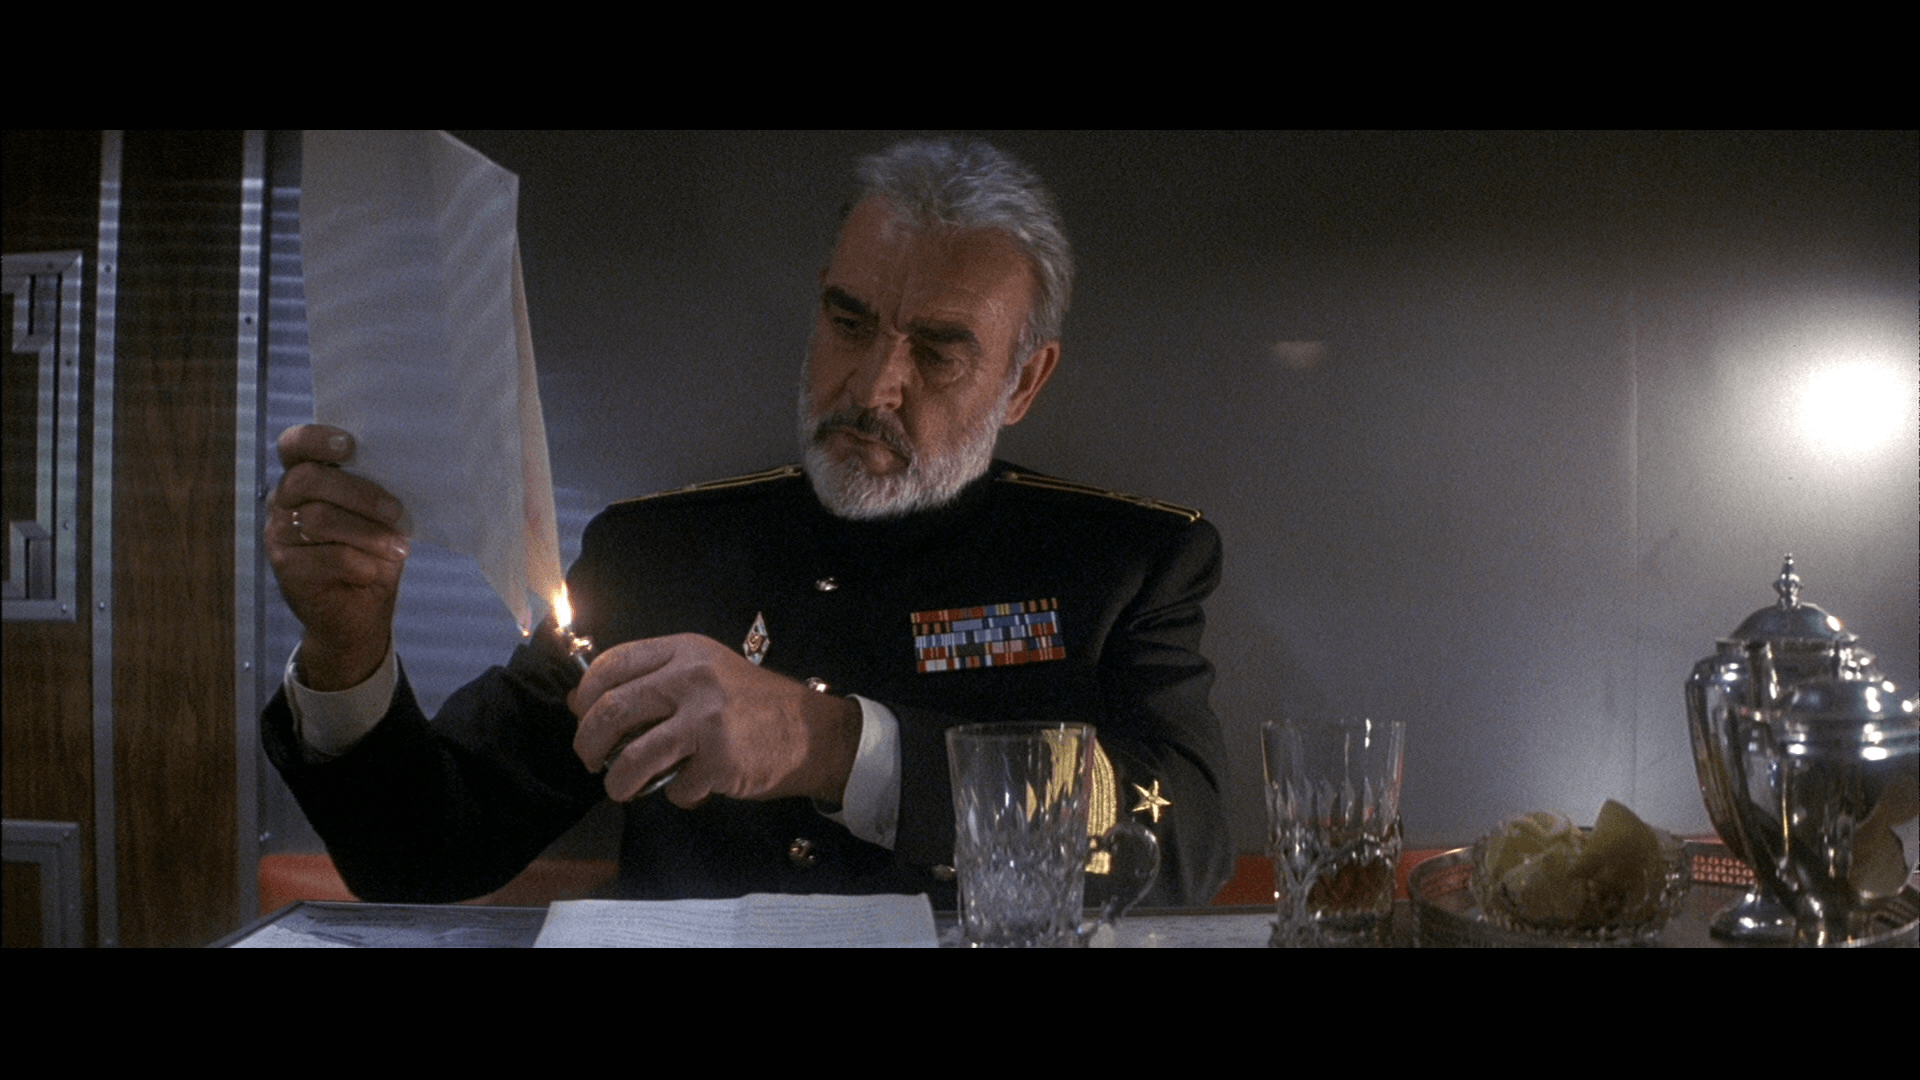 Sean Connery Hunt for Red October. I love him. He's